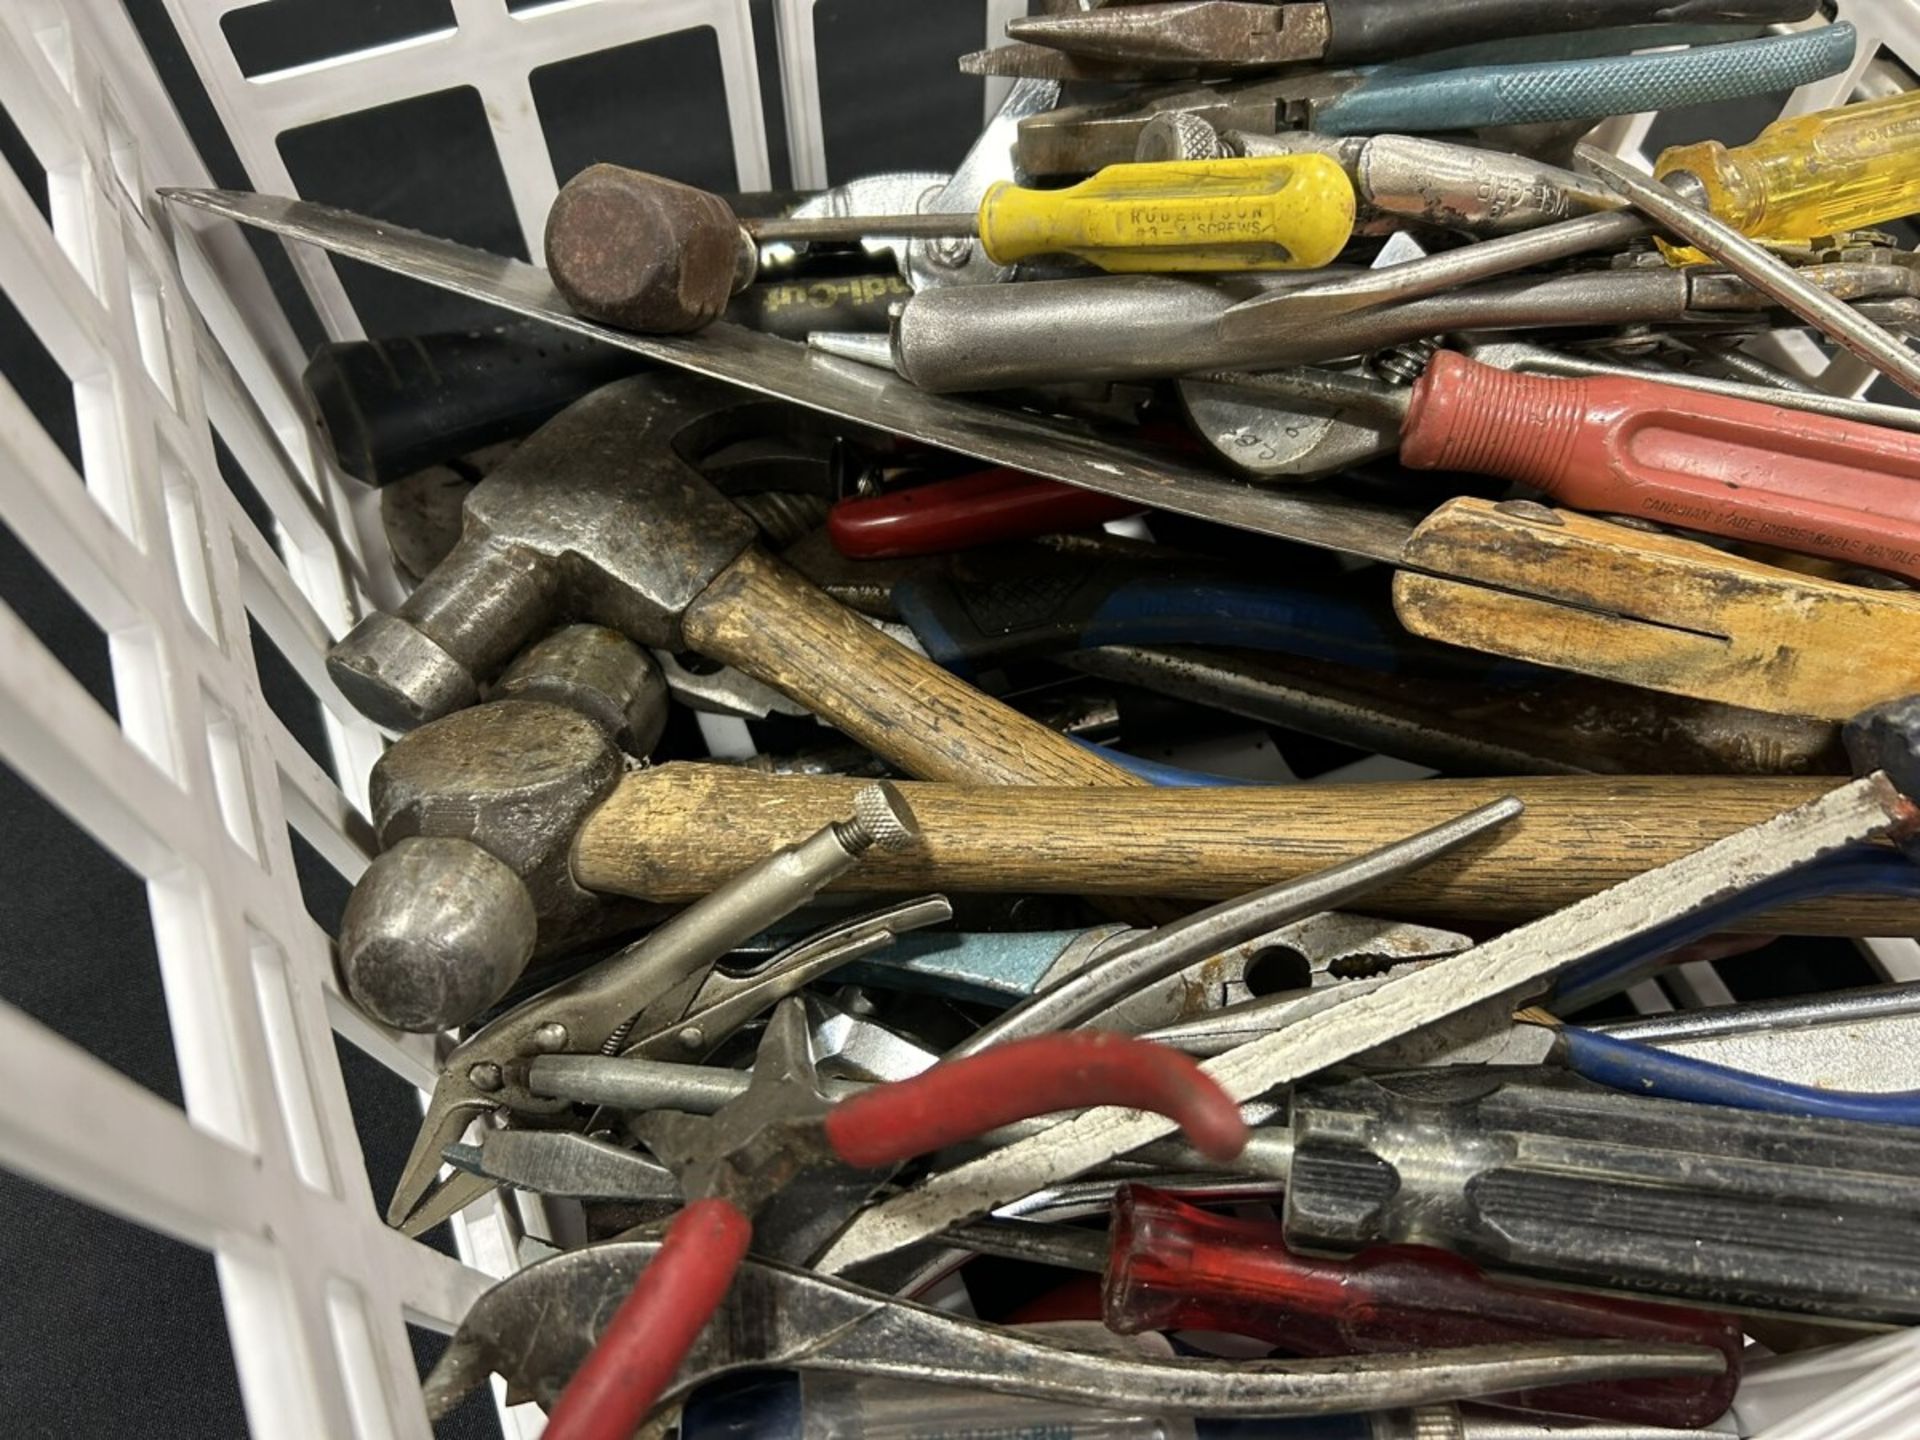 ASSORTED HAND TOOLS, CRESCENT WRENCHES, PLIERS, SCREWDRIVERS, ETC… - Image 4 of 5